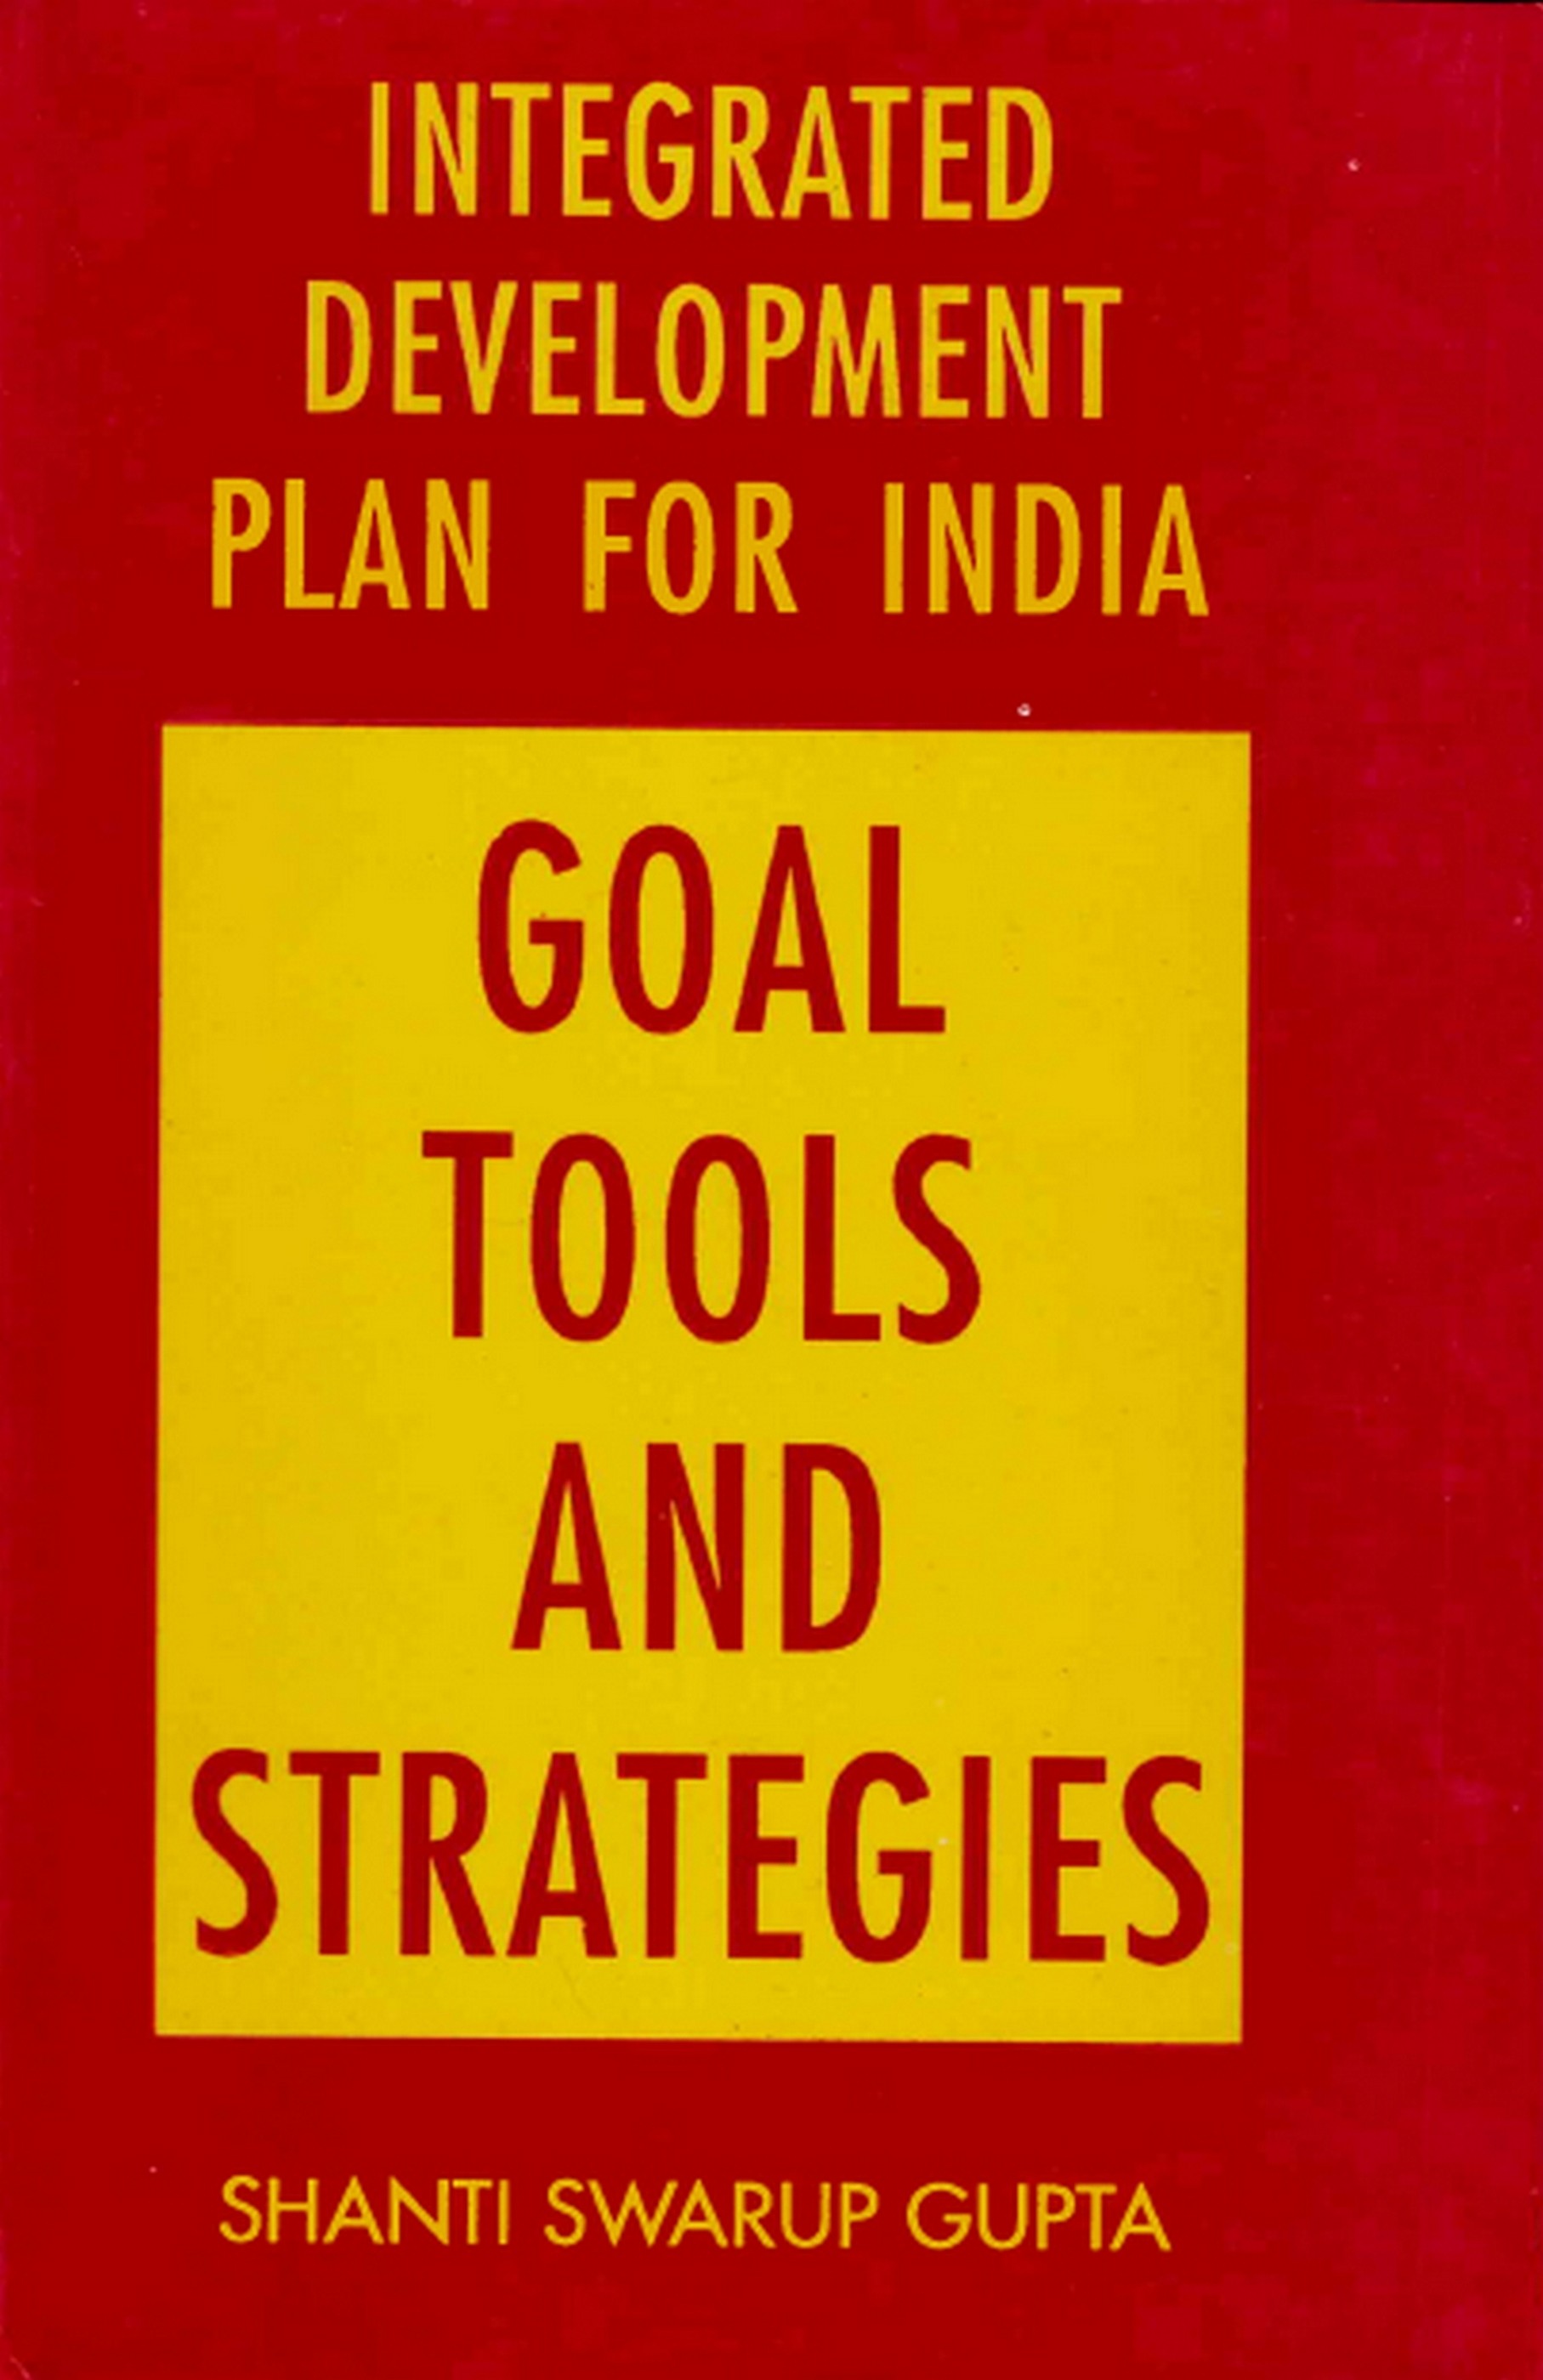 Integrated Development Plan for India Goal, Tools and Strategies